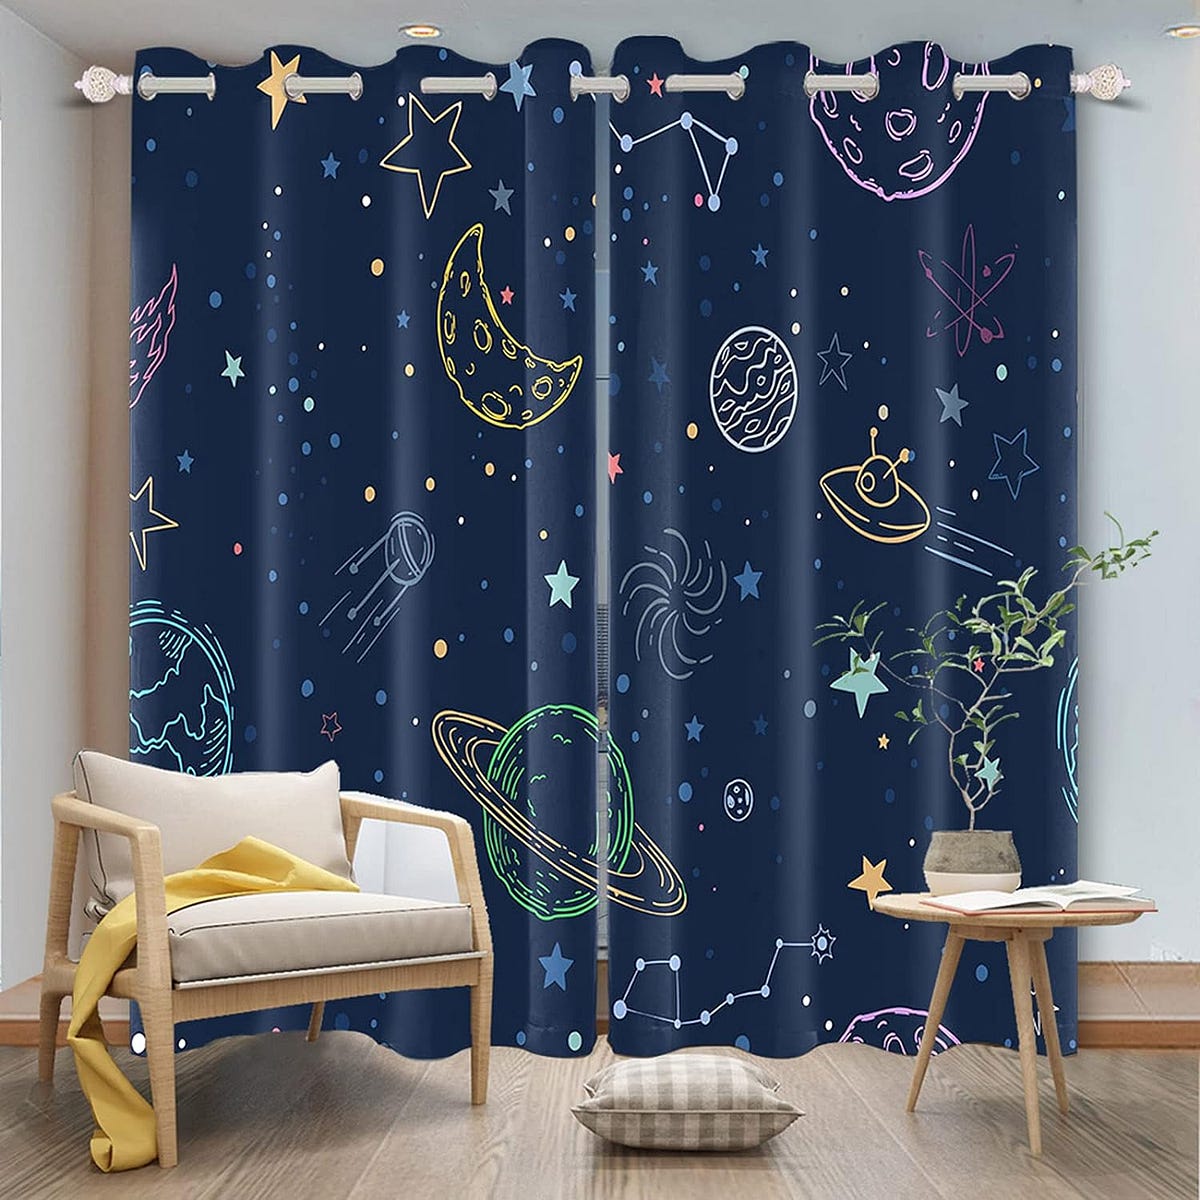 Kids Room Curtains: Adding Fun and Functionality to Children’s Spaces | by Adnankhanwhizweb | Apr, 2024 | Medium